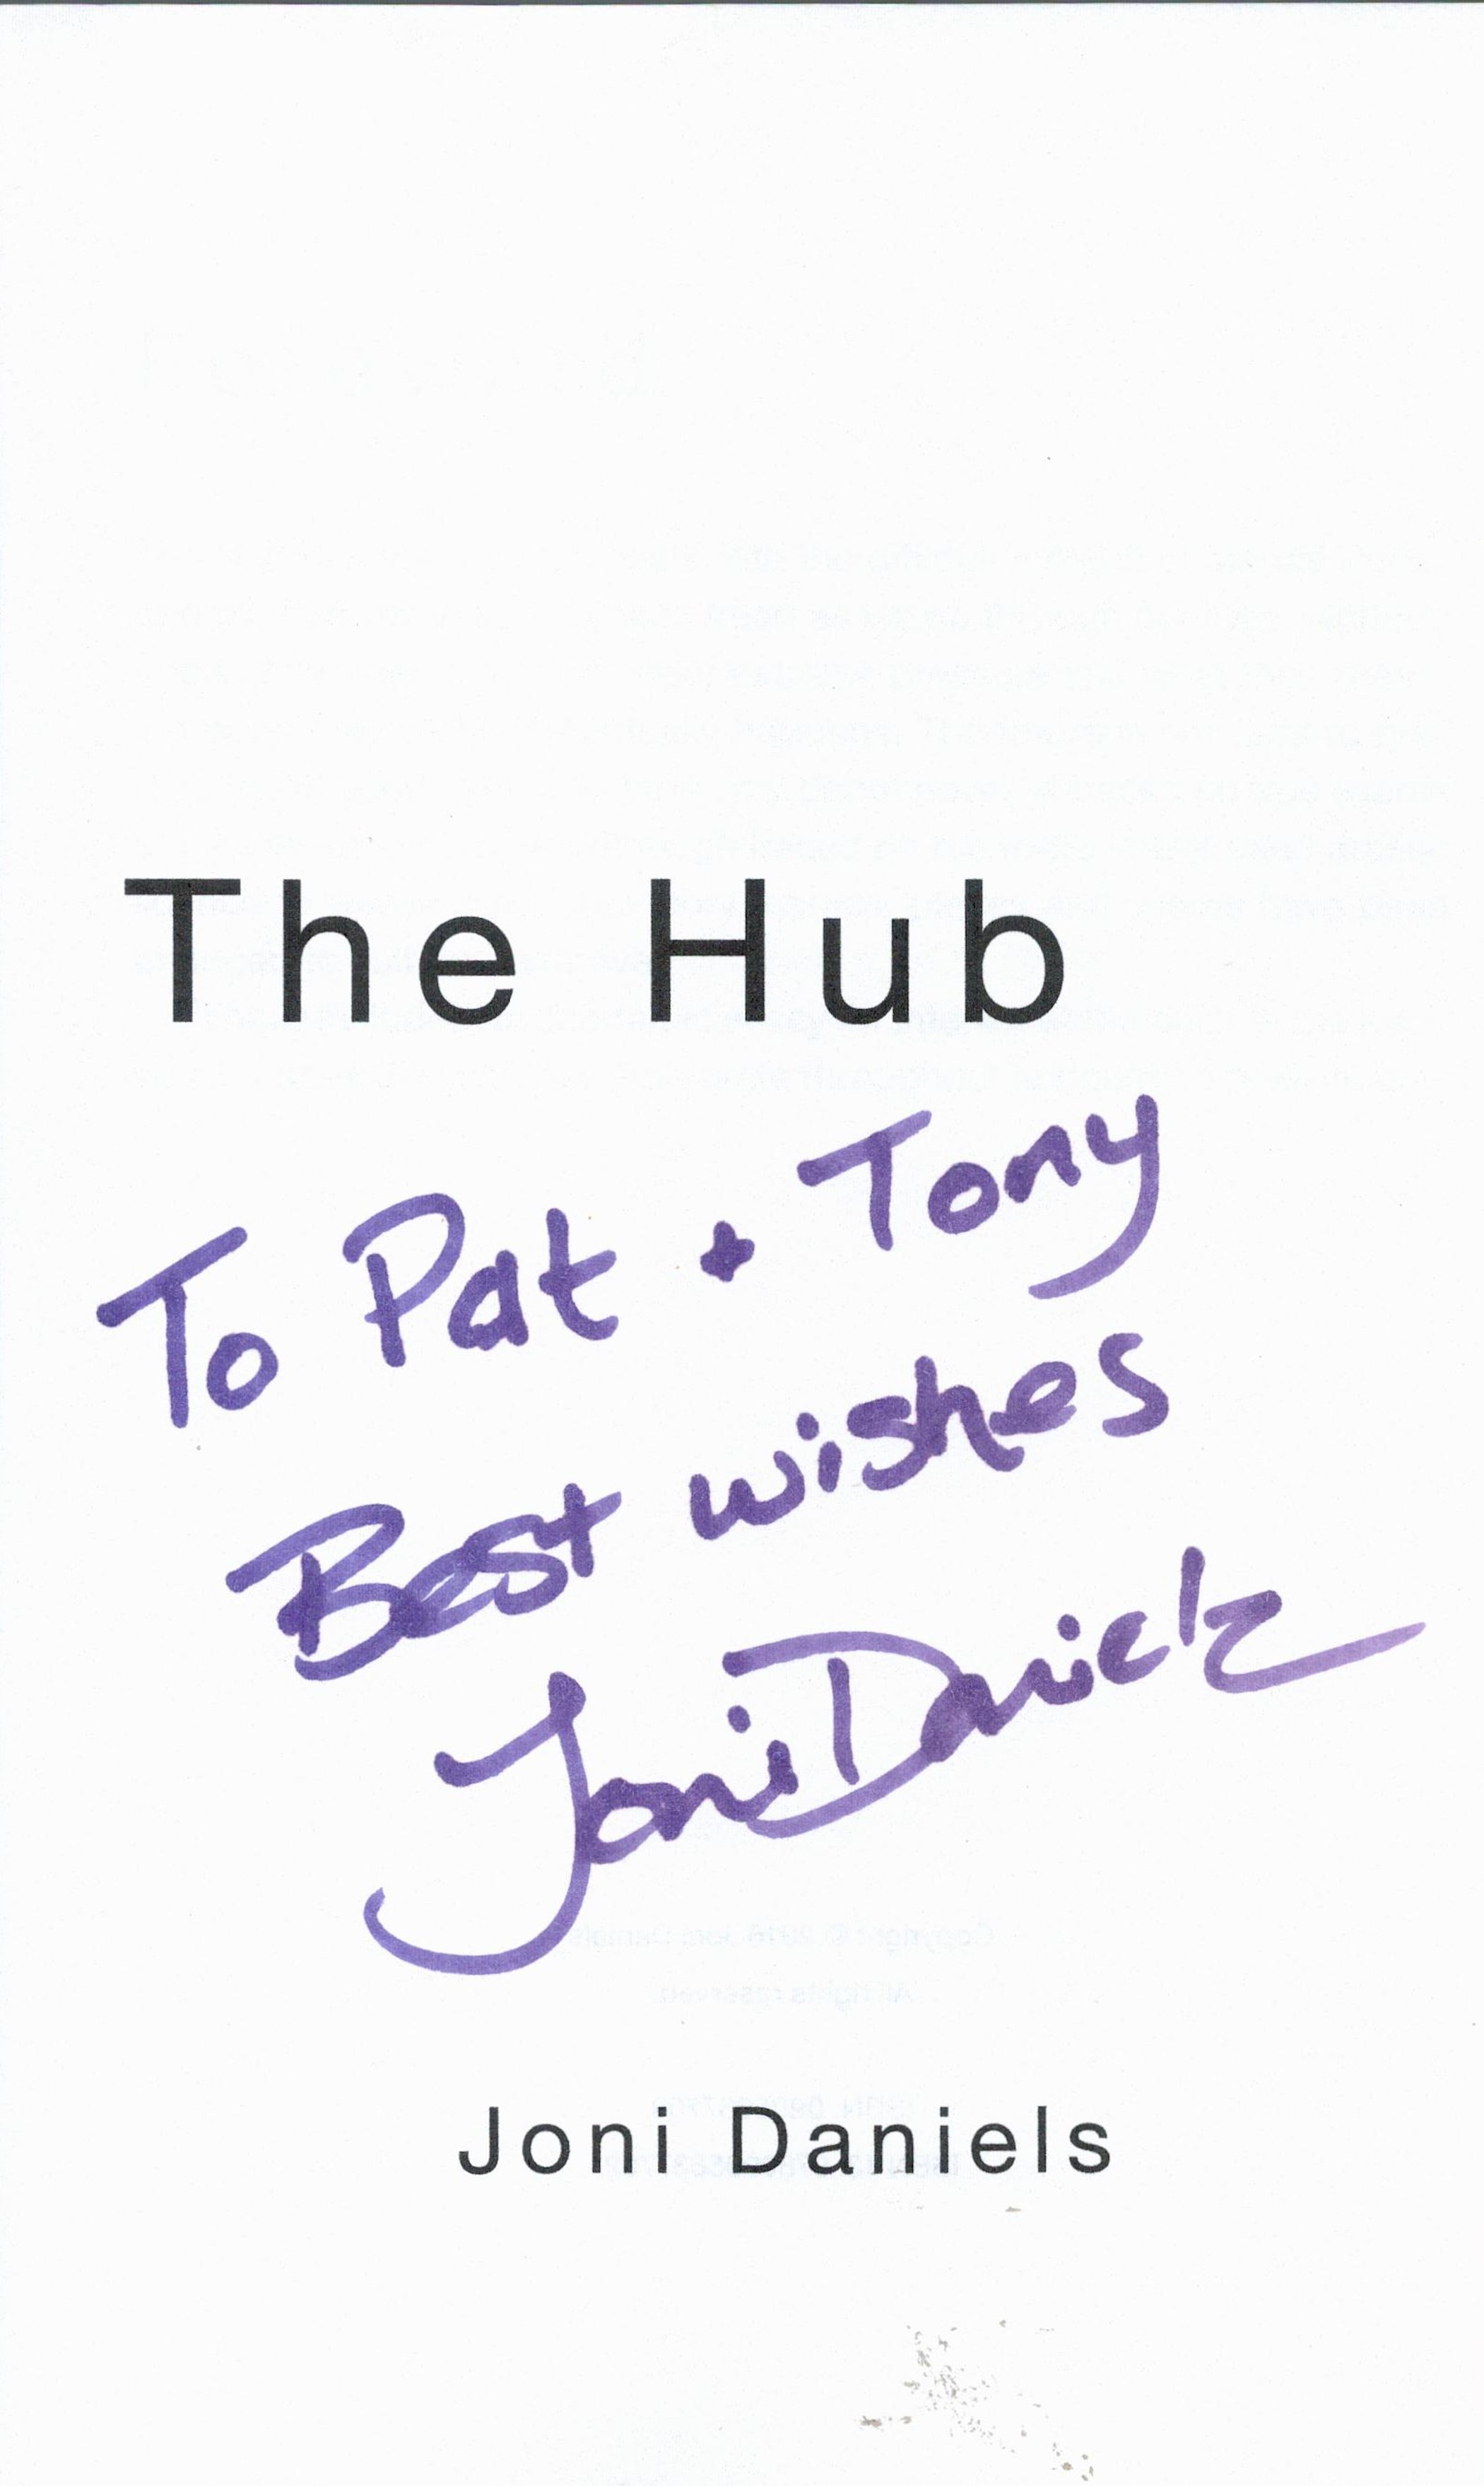 Signed Book Joni Daniels The Hub First Edition 2016 Softback Book Signed by Joni Daniels on the - Image 3 of 4